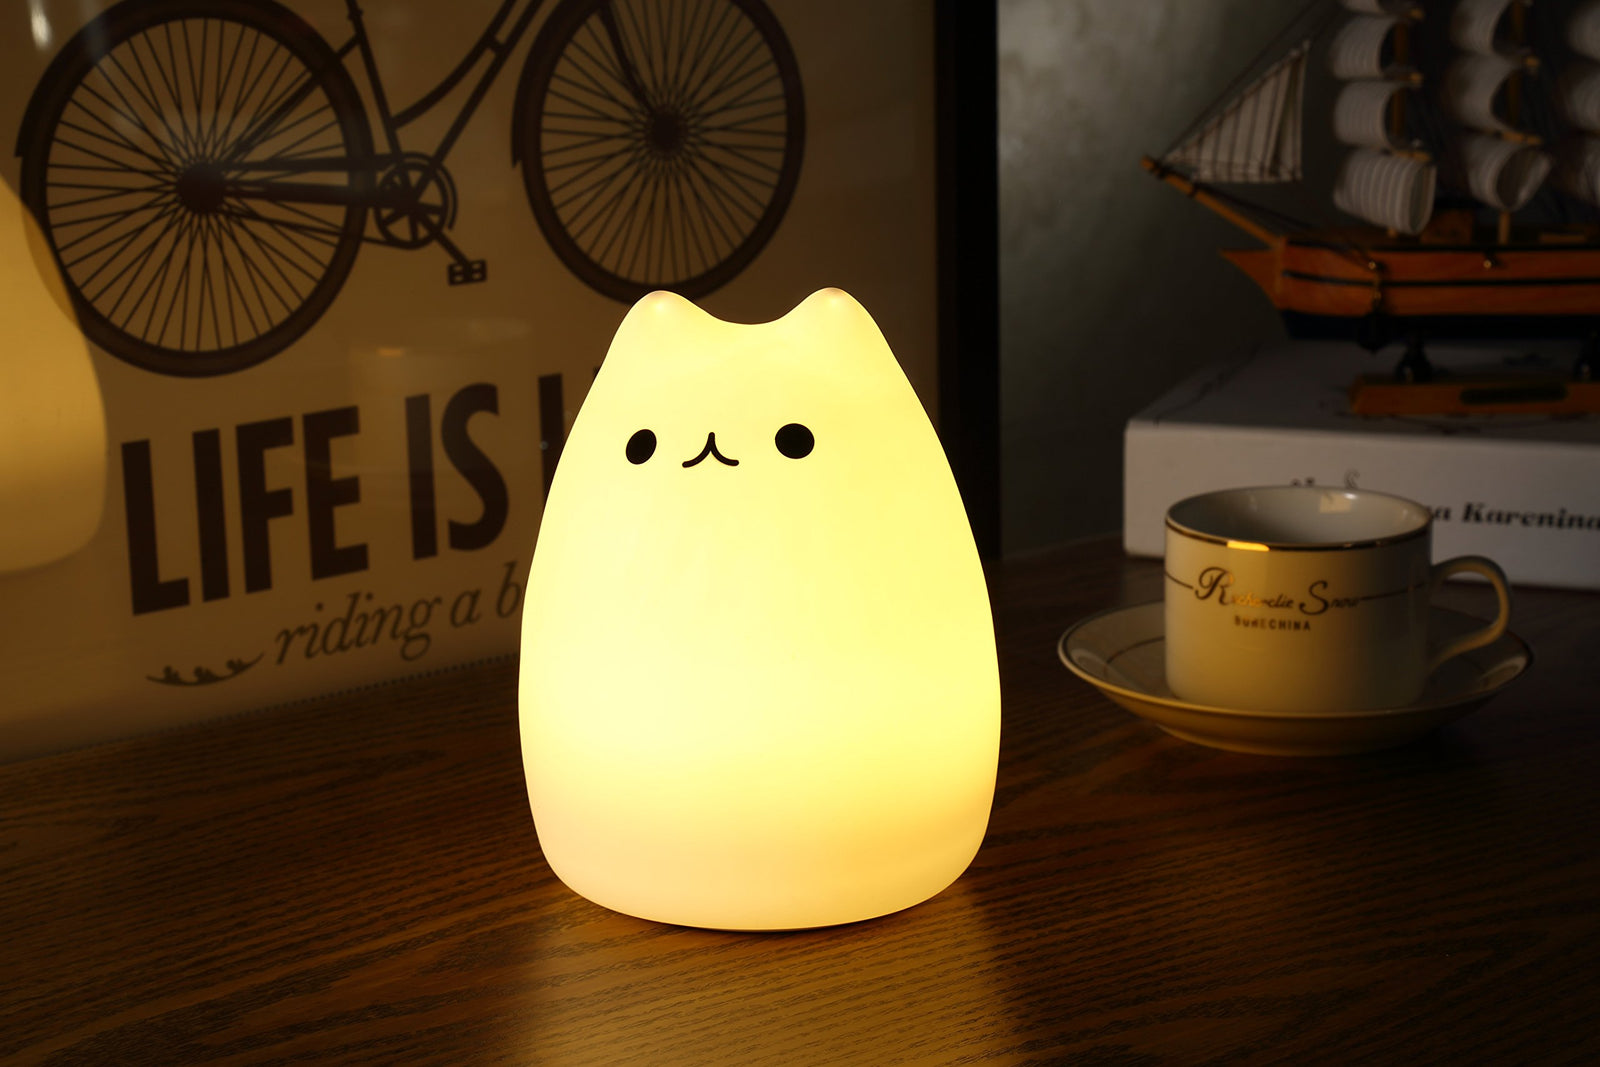 WoneNice Portable Cute Cat Silicone LED Night Lamp,USB Rechargeable Children Night Light with Warm White & 7-Color Breathing Modes, Touch Sensor Control, Christmas Gifts for Baby, Kids, Adults